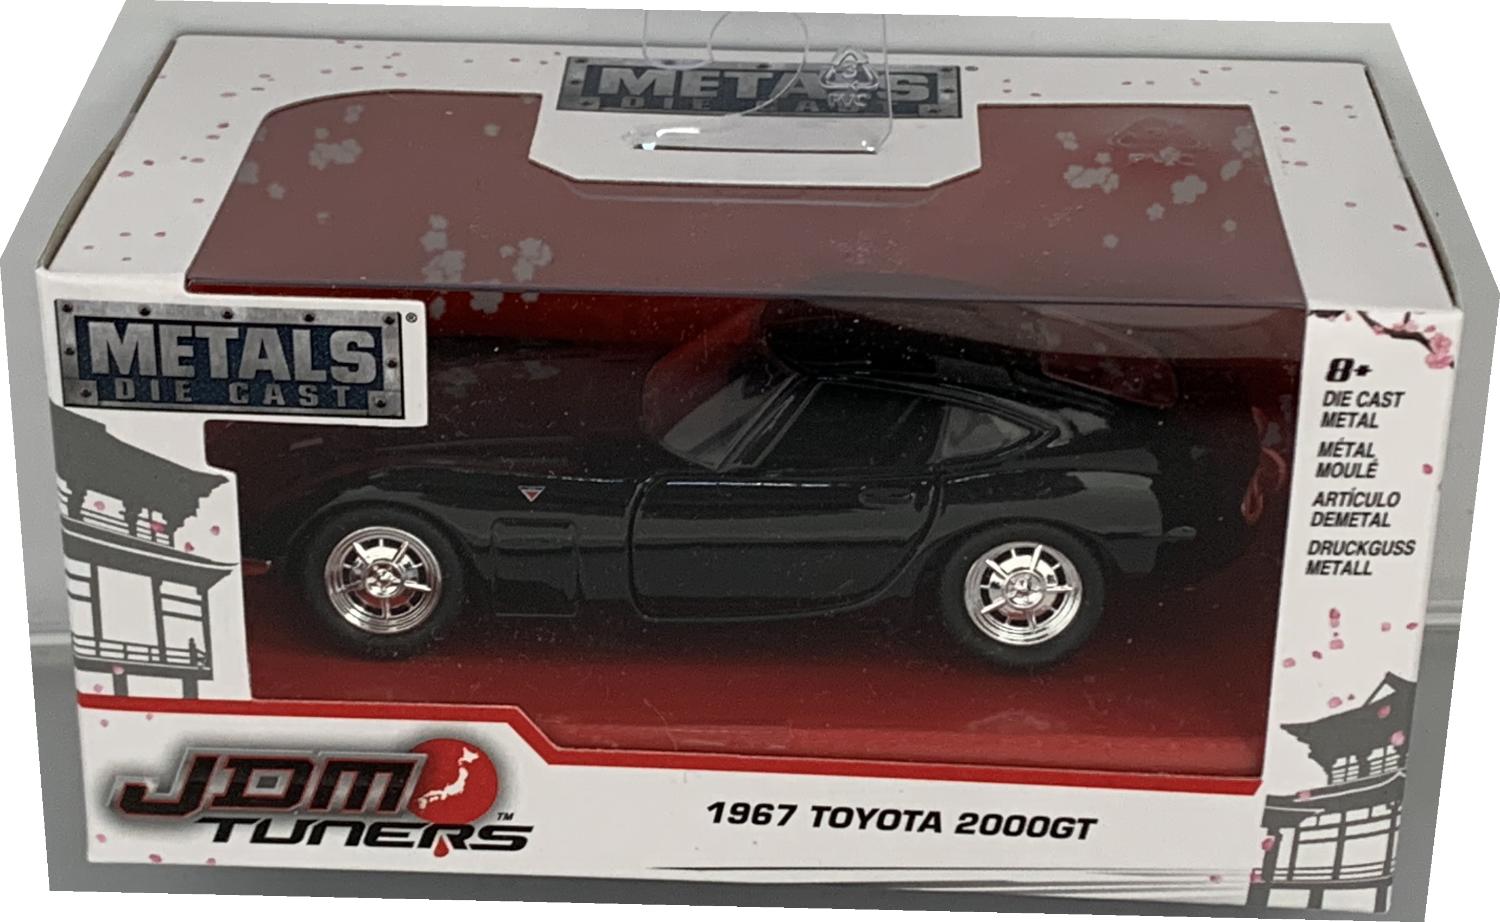 An excellent scale model of a Toyota 2000GT decorated in glossy black with chrome wheels